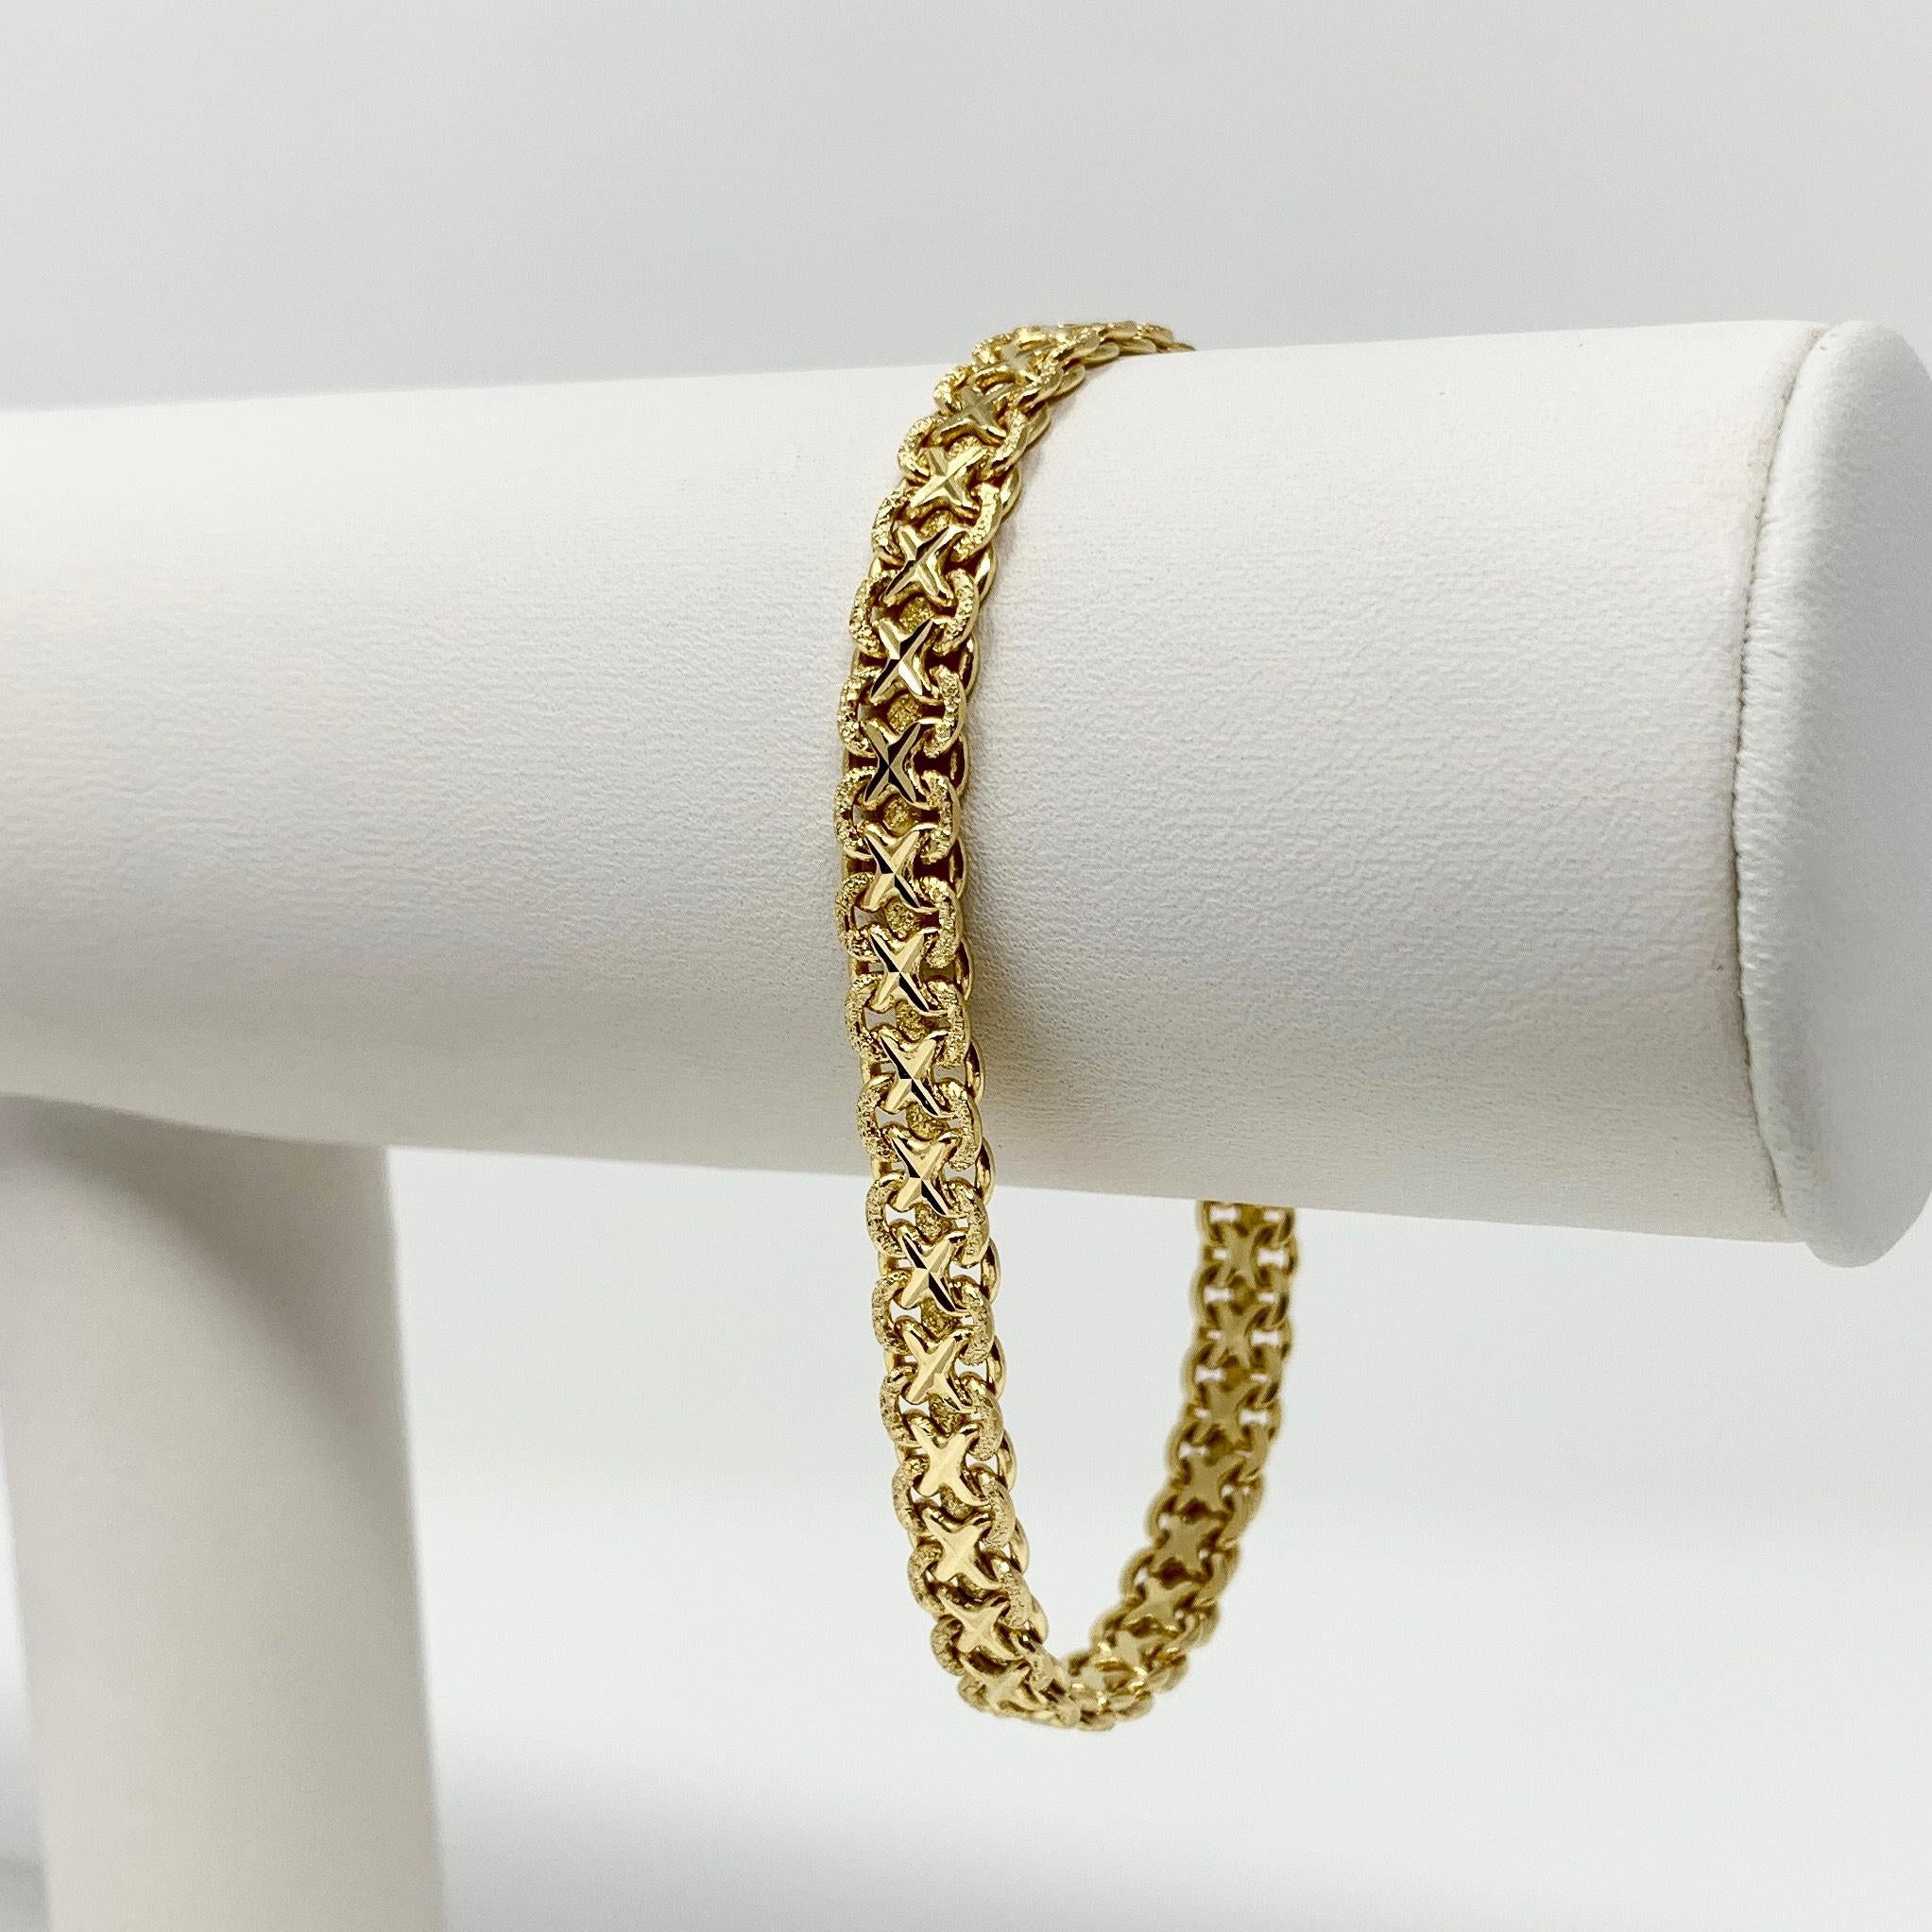 14k Yellow Gold 13.5g Fancy Link 6mm Bracelet Italy 7 Inches

Condition:  Excellent (Professionally Cleaned and Polished)
Metal:  14k Gold (Marked, and Professionally Tested)
Weight:  13.5g
Length:  7 Inches
Width:  6mm 
Closure:  Box Tab Insert